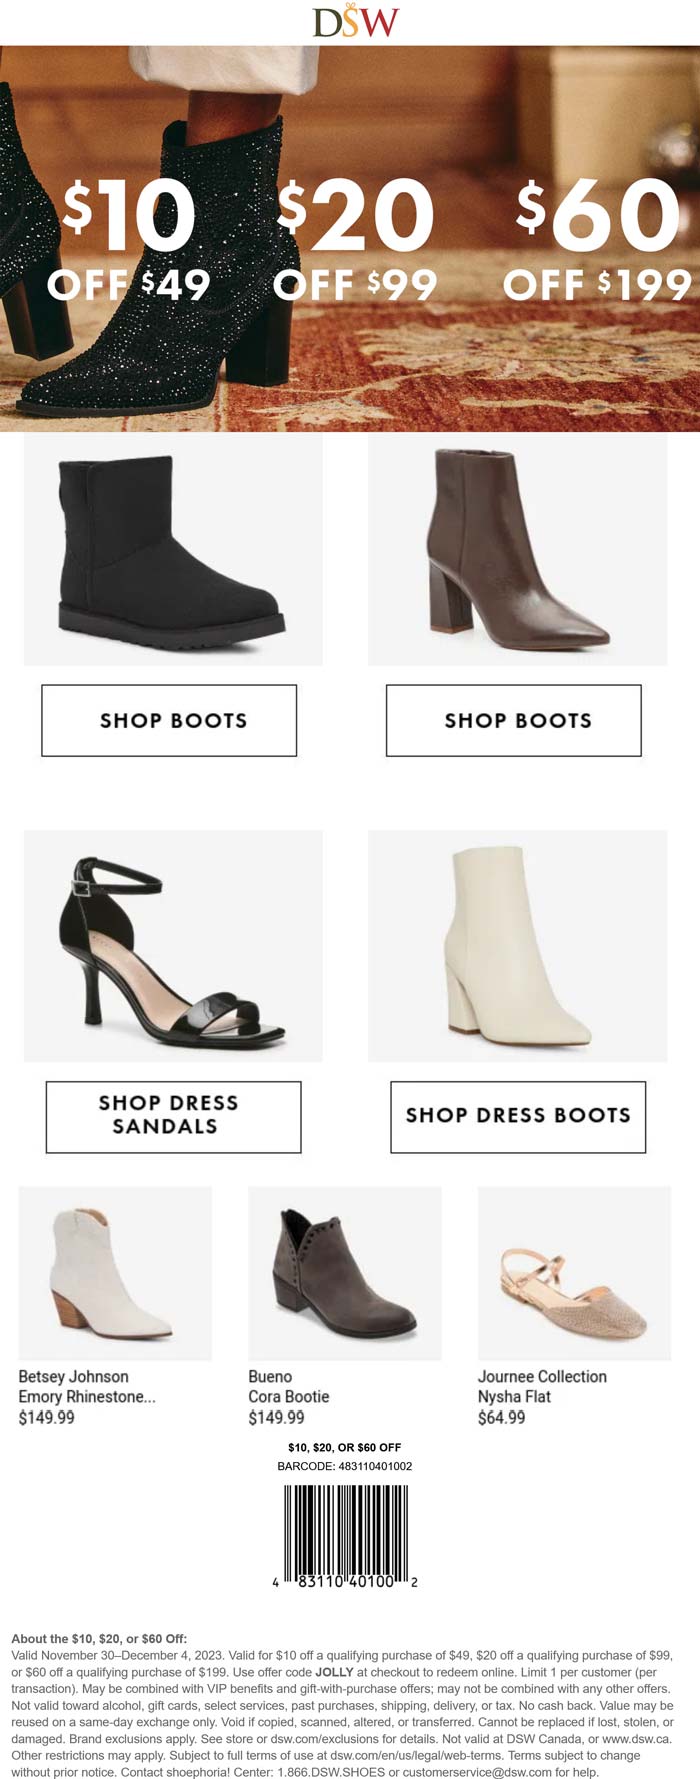 DSW stores Coupon  $10-$60 off $49+ at DSW shoes, or online via promo code JOLLY #dsw 